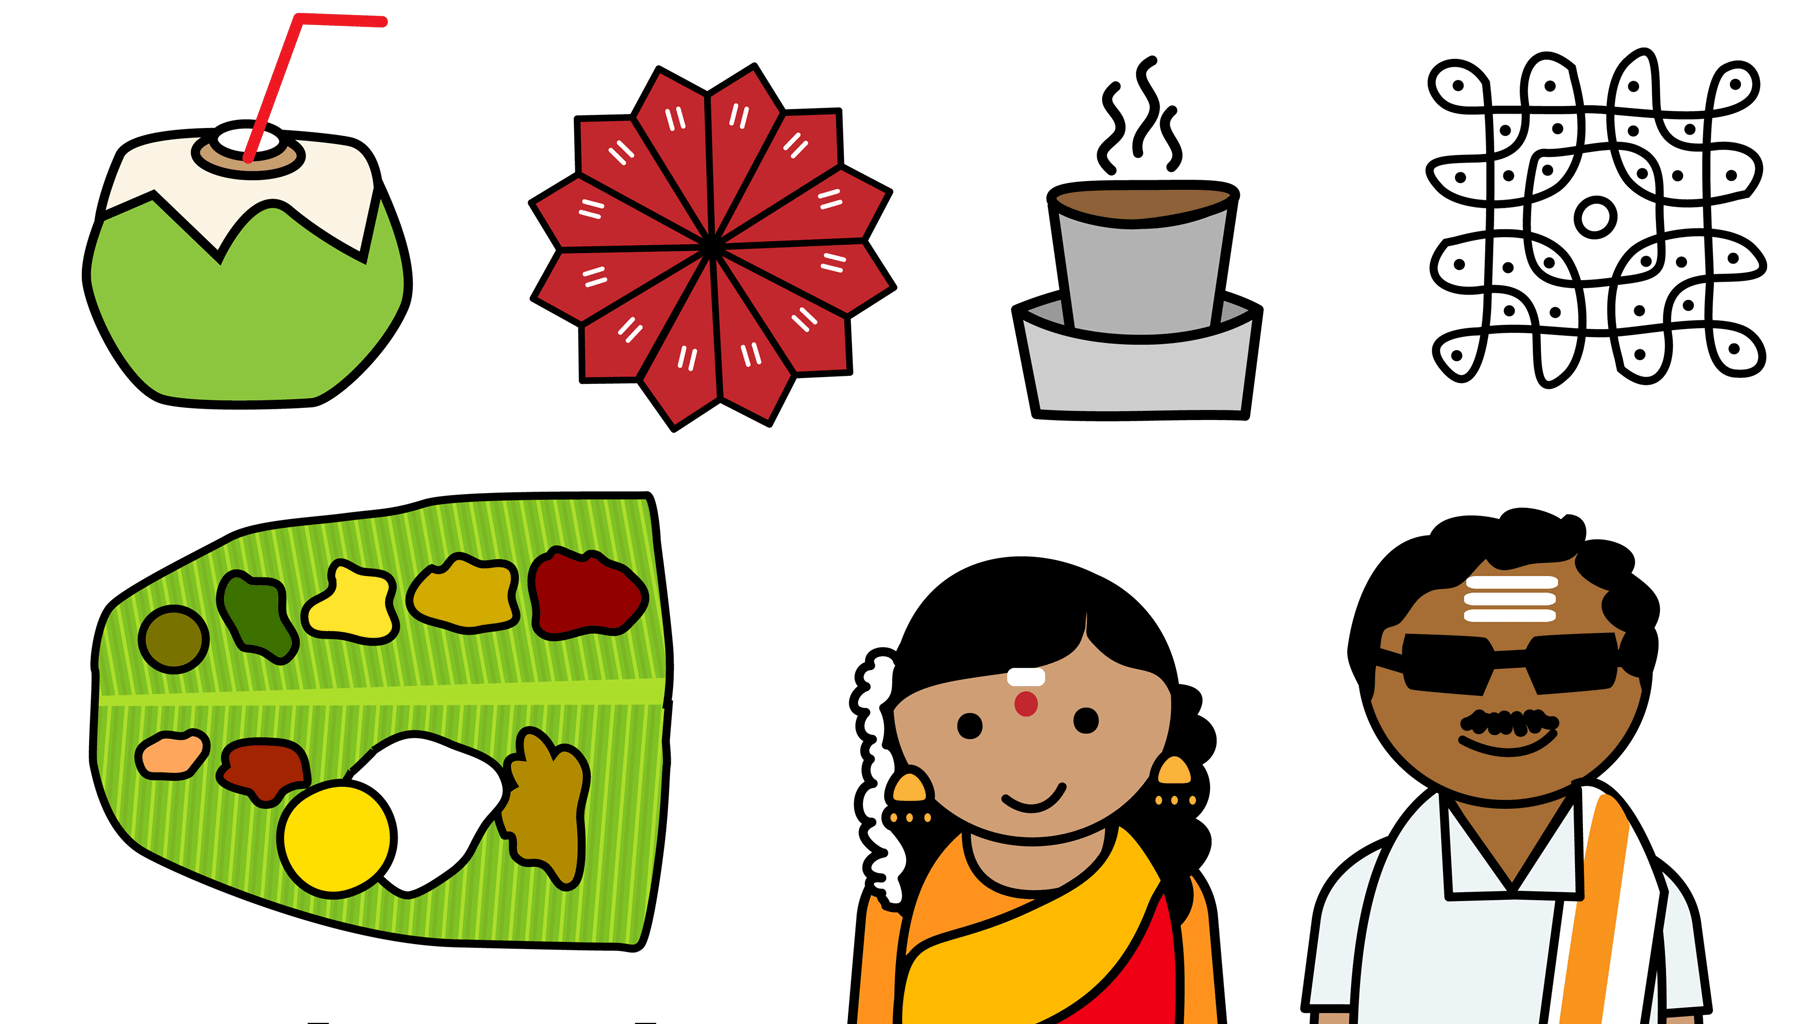 Tamil New Year Makes much more astrological and astronomical sense than the Julian New Year. (Photo: iStockphoto)